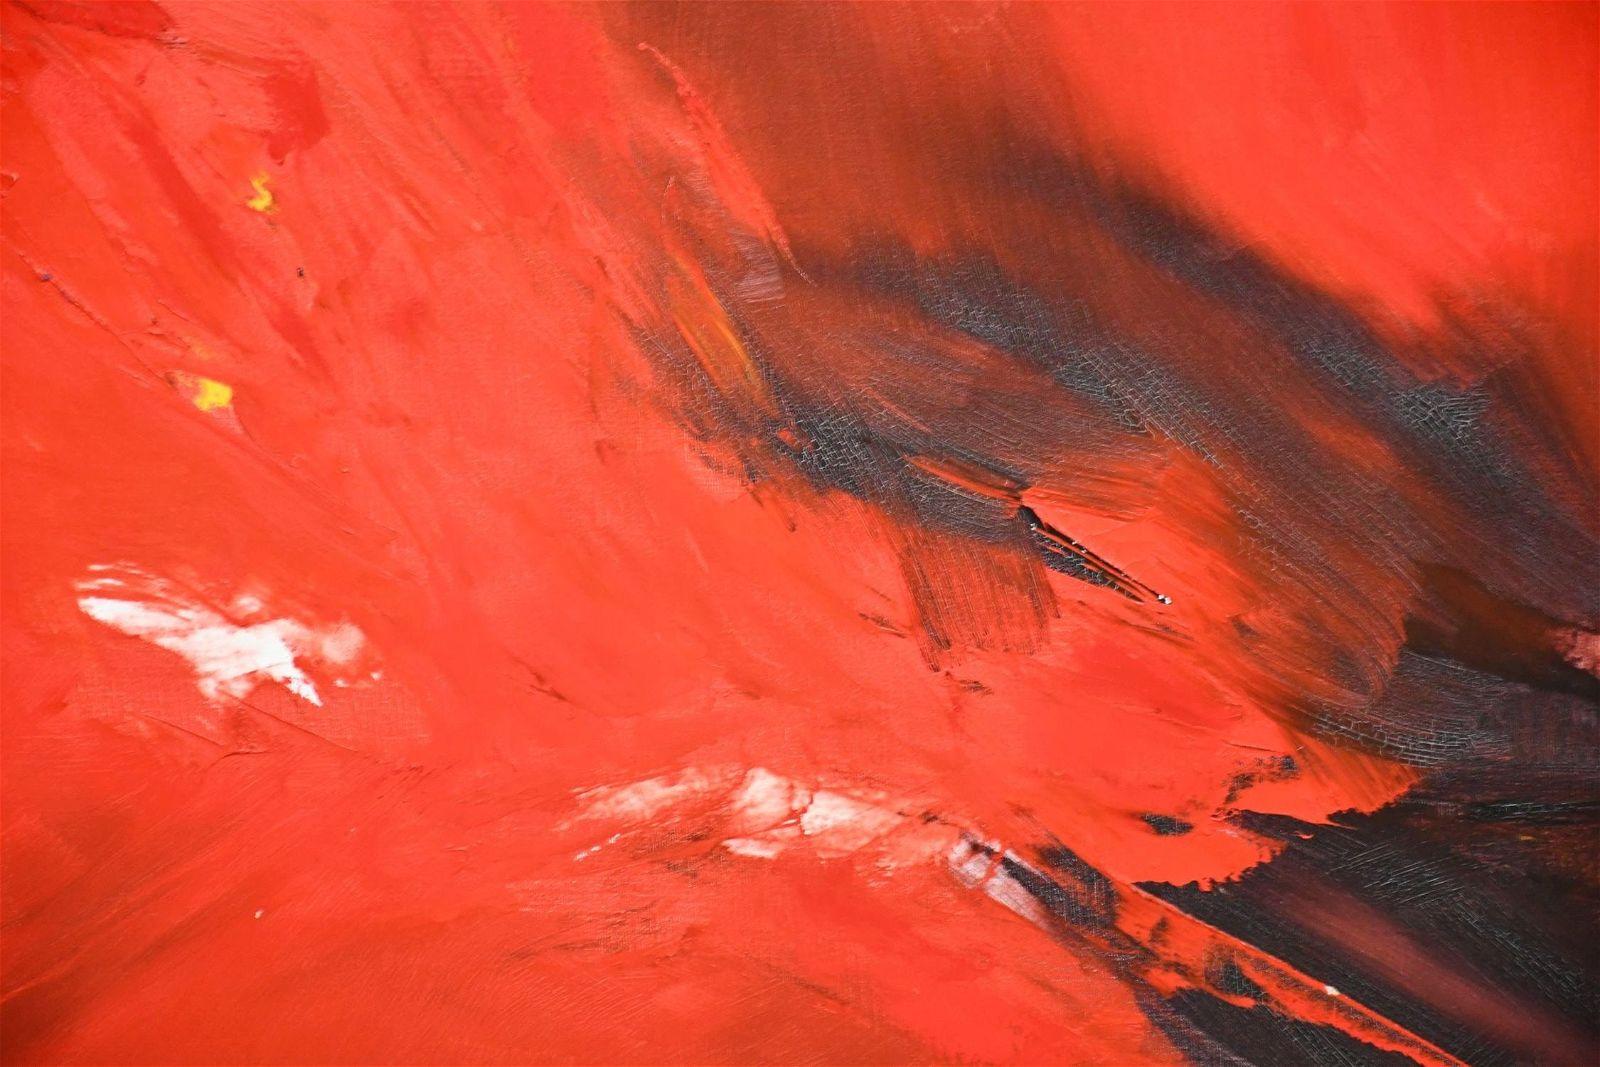  Abstract Composition In Red Large Oil Painting
Artist signed, dated verso.
Peter Kuckei 1938 born in Husum, Holstein Germany.
1960-1961 studied at the State Academy of Fine Arts, Bremen
1961-1963 studied at the State Academy of Fine Arts,